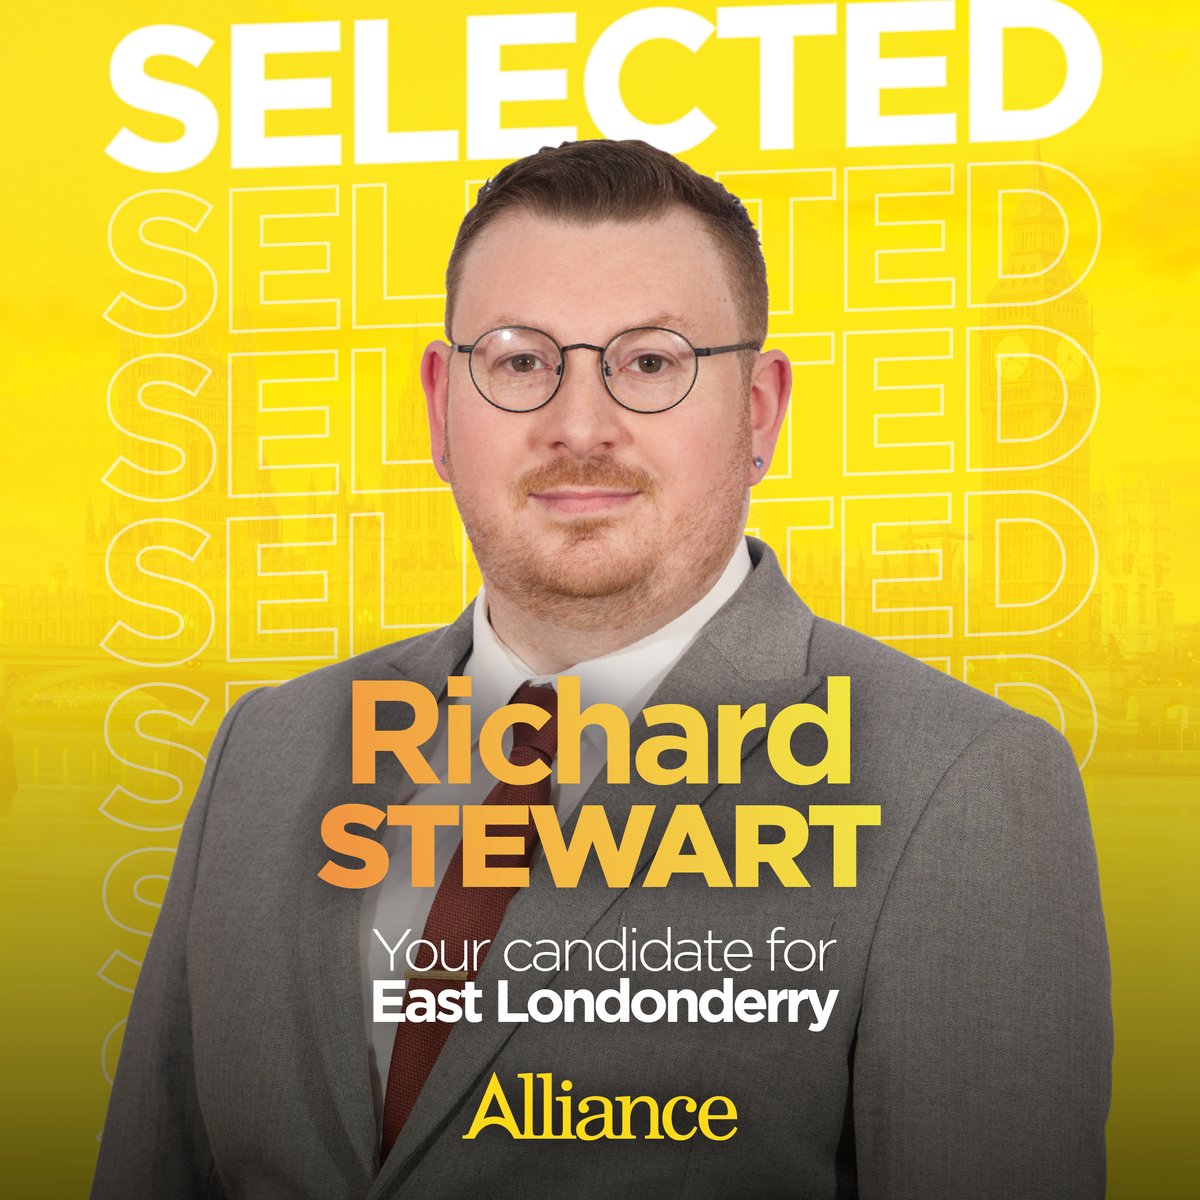 Congratulations to @alliancerichard on being selected as Alliance's General Election candidate for East Londonderry. #AllianceWorks